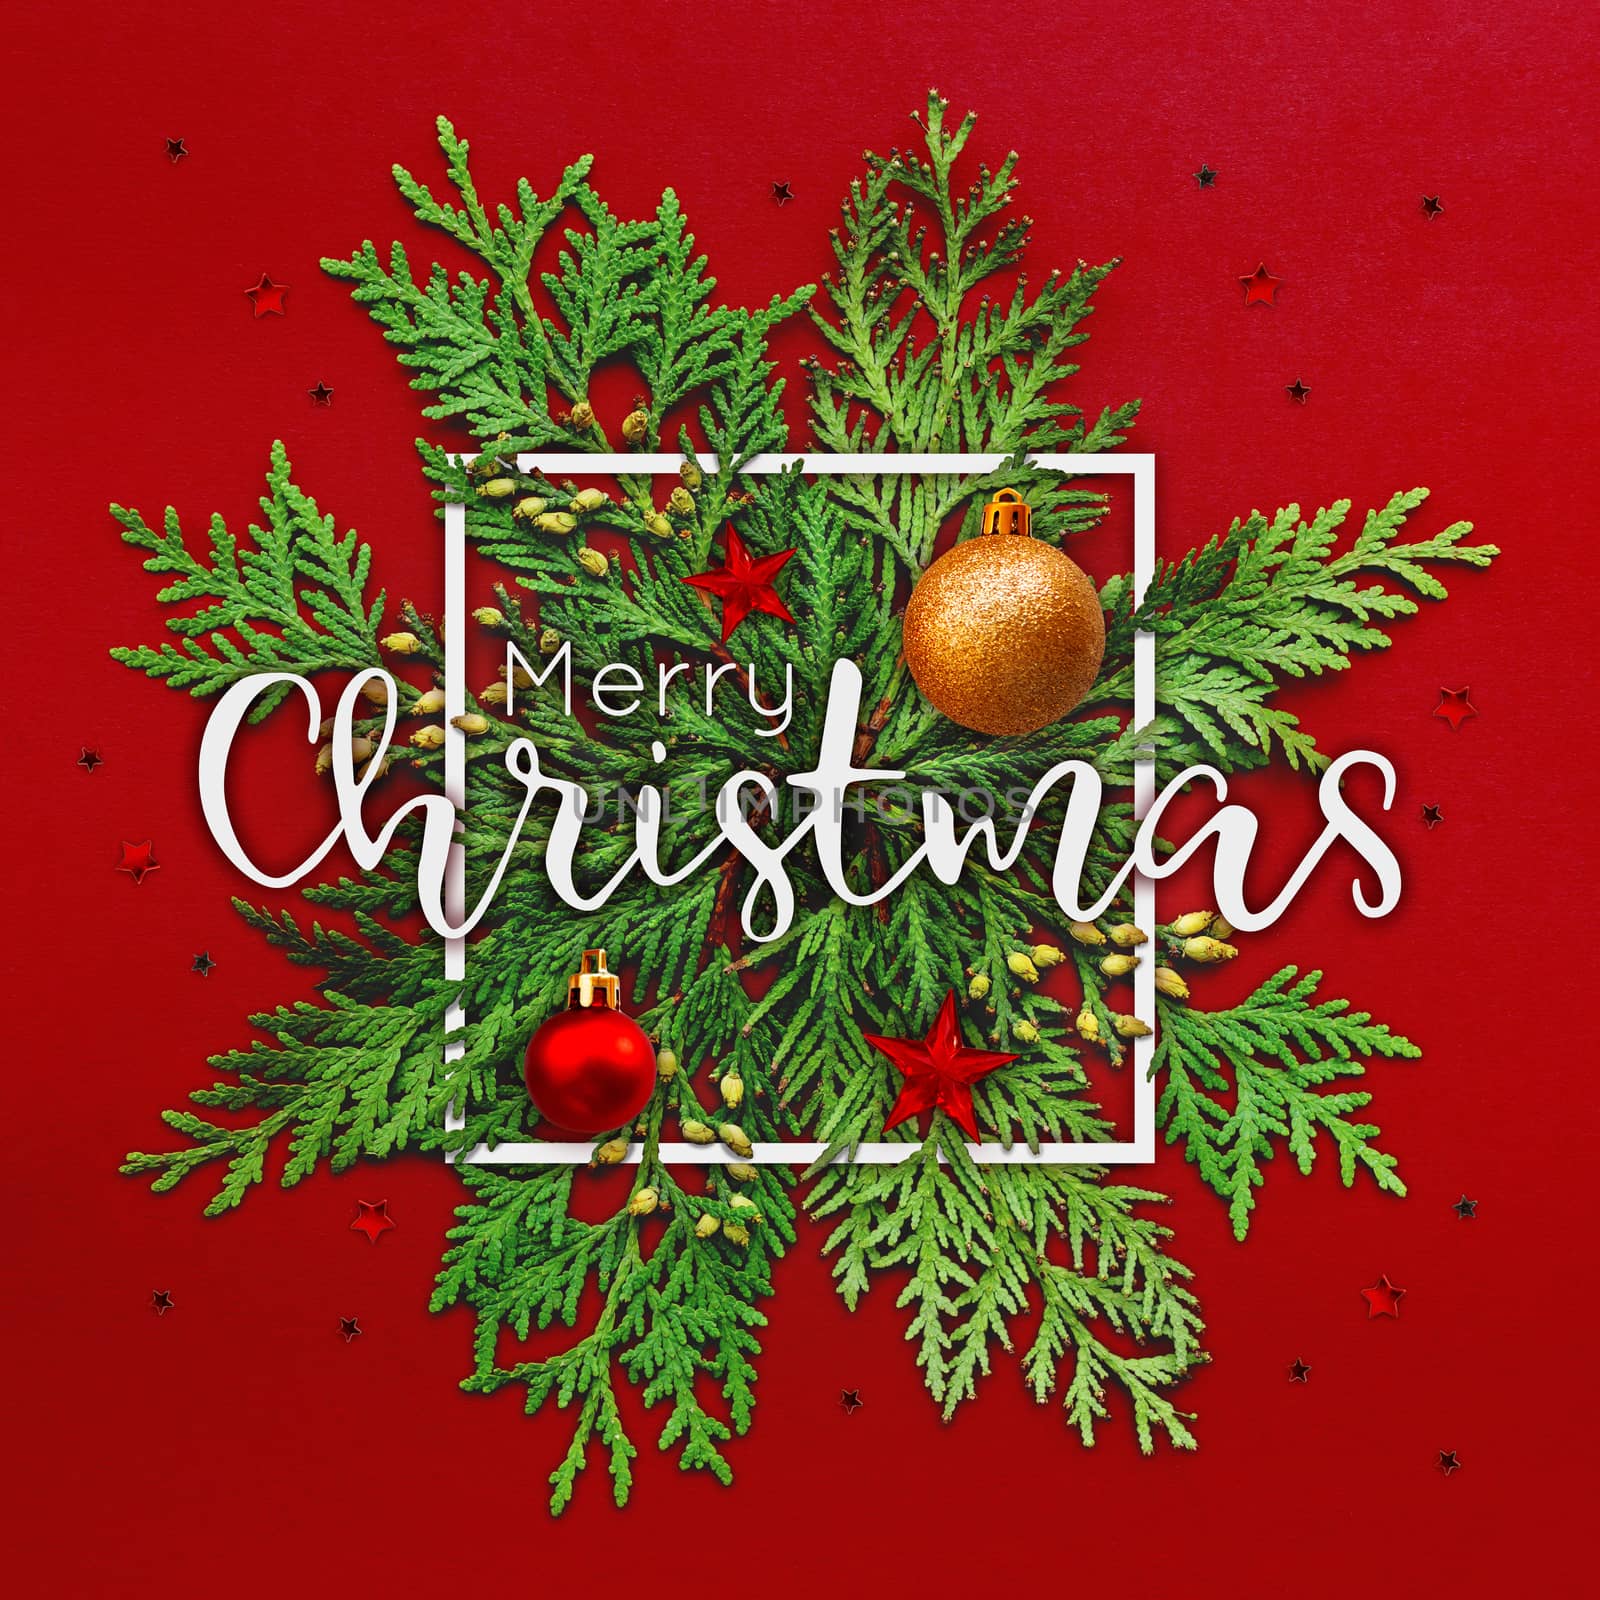 Christmas background with thuja branches and words MERRY CHRISTMAS in white square frame. Trendy Xmas greeting with stars and ball decorations on red backdrop.